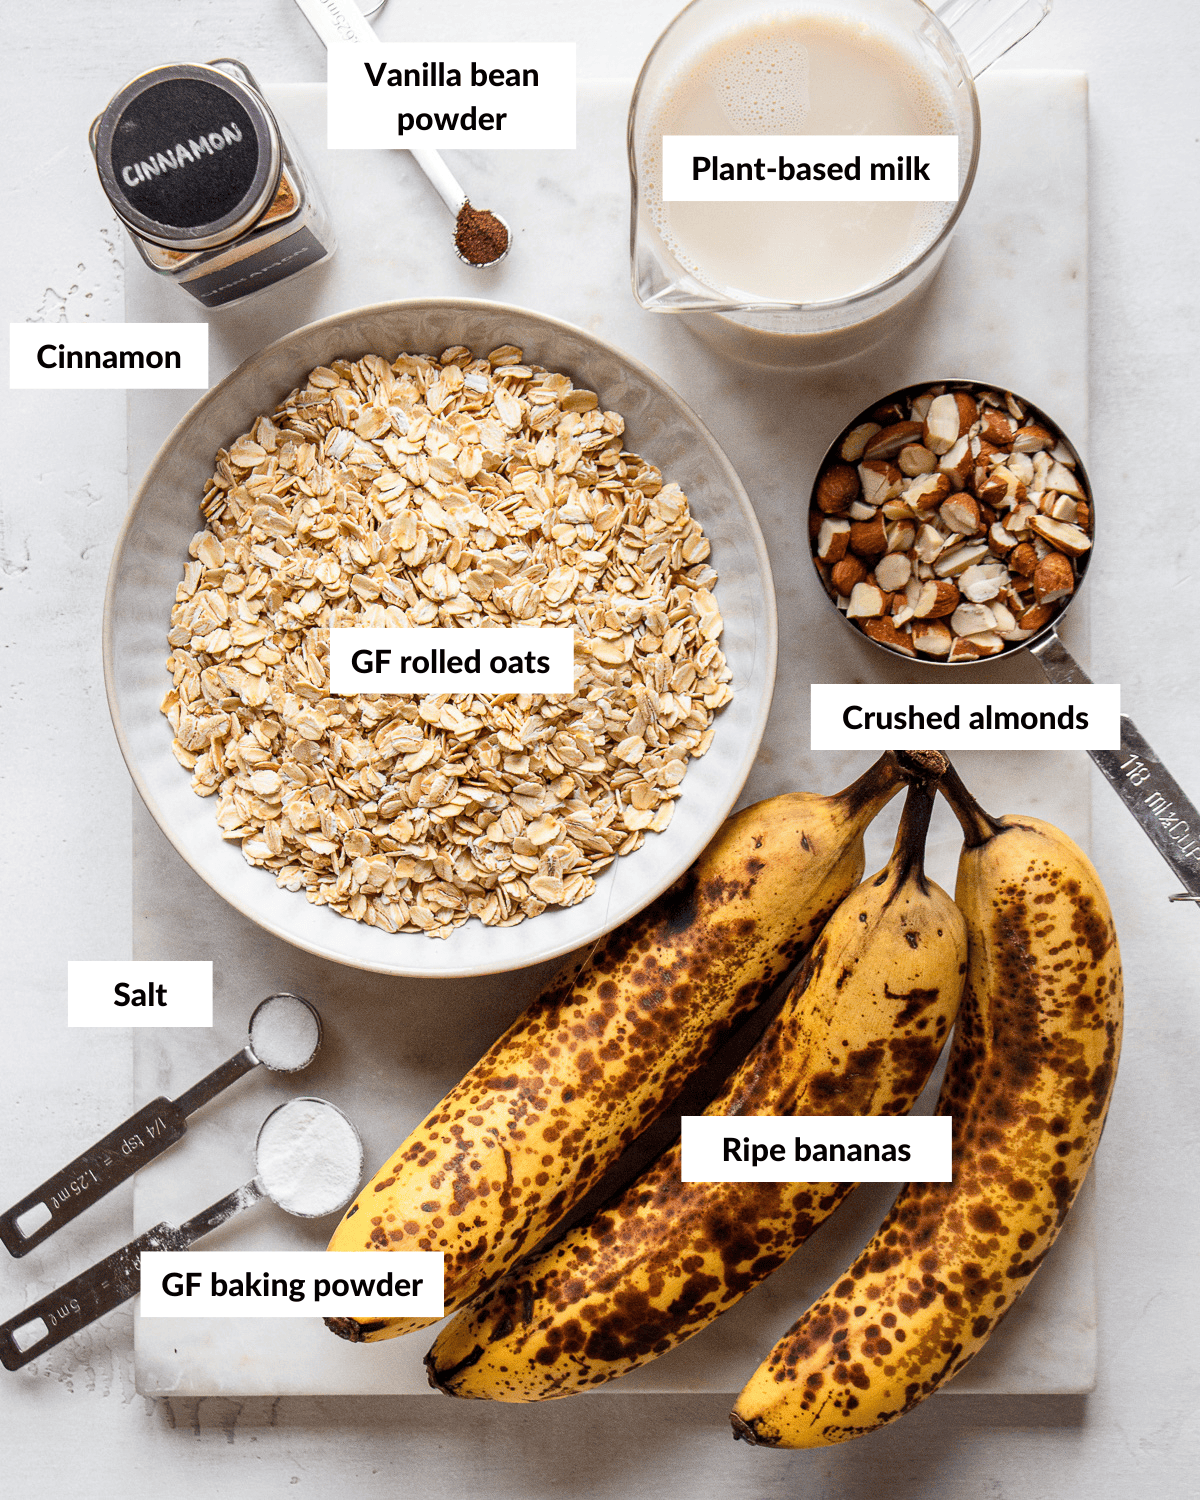 Ingredients for banana baked oatmeal with descriptive labels.